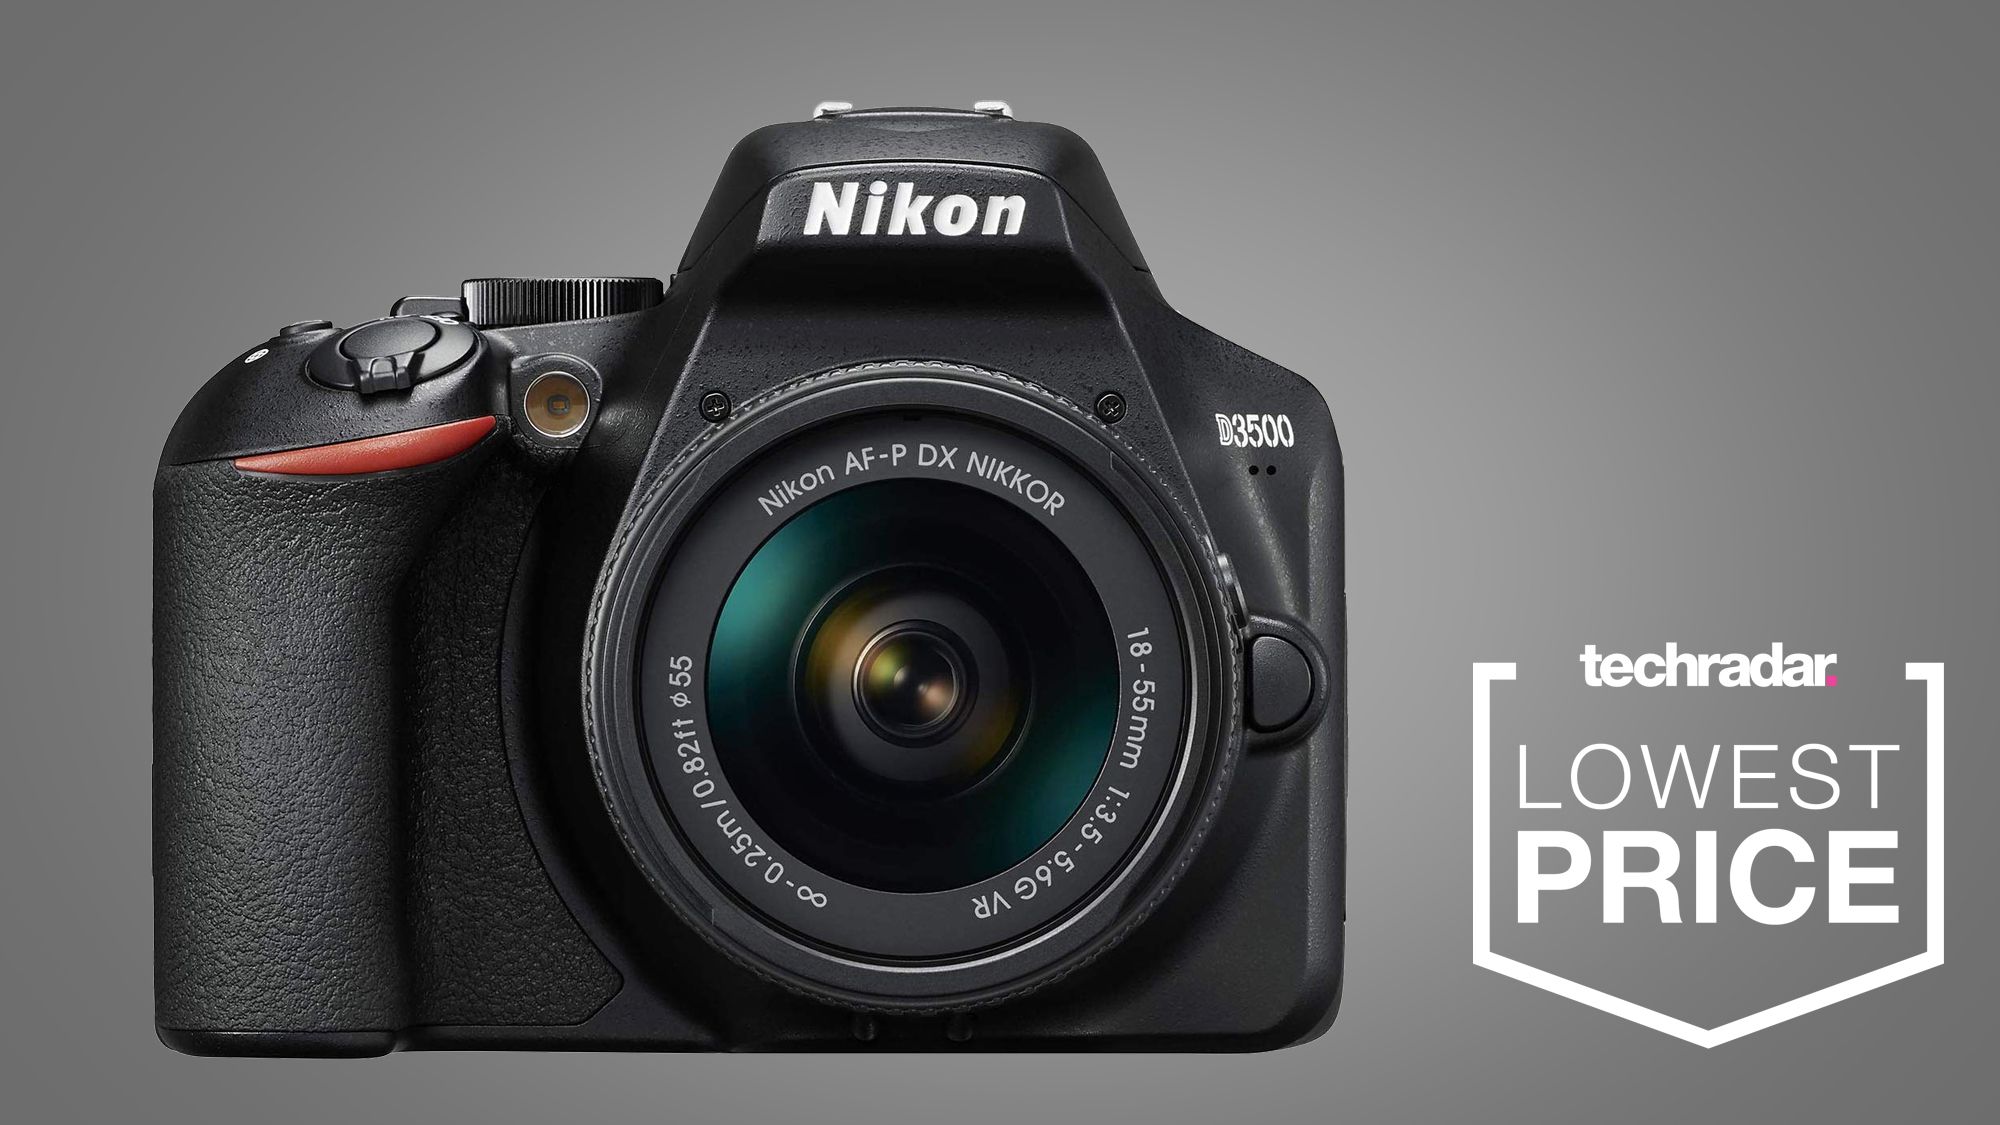 The Nikon D3500 drops to its lowest price in this unmissable Black Friday bargain